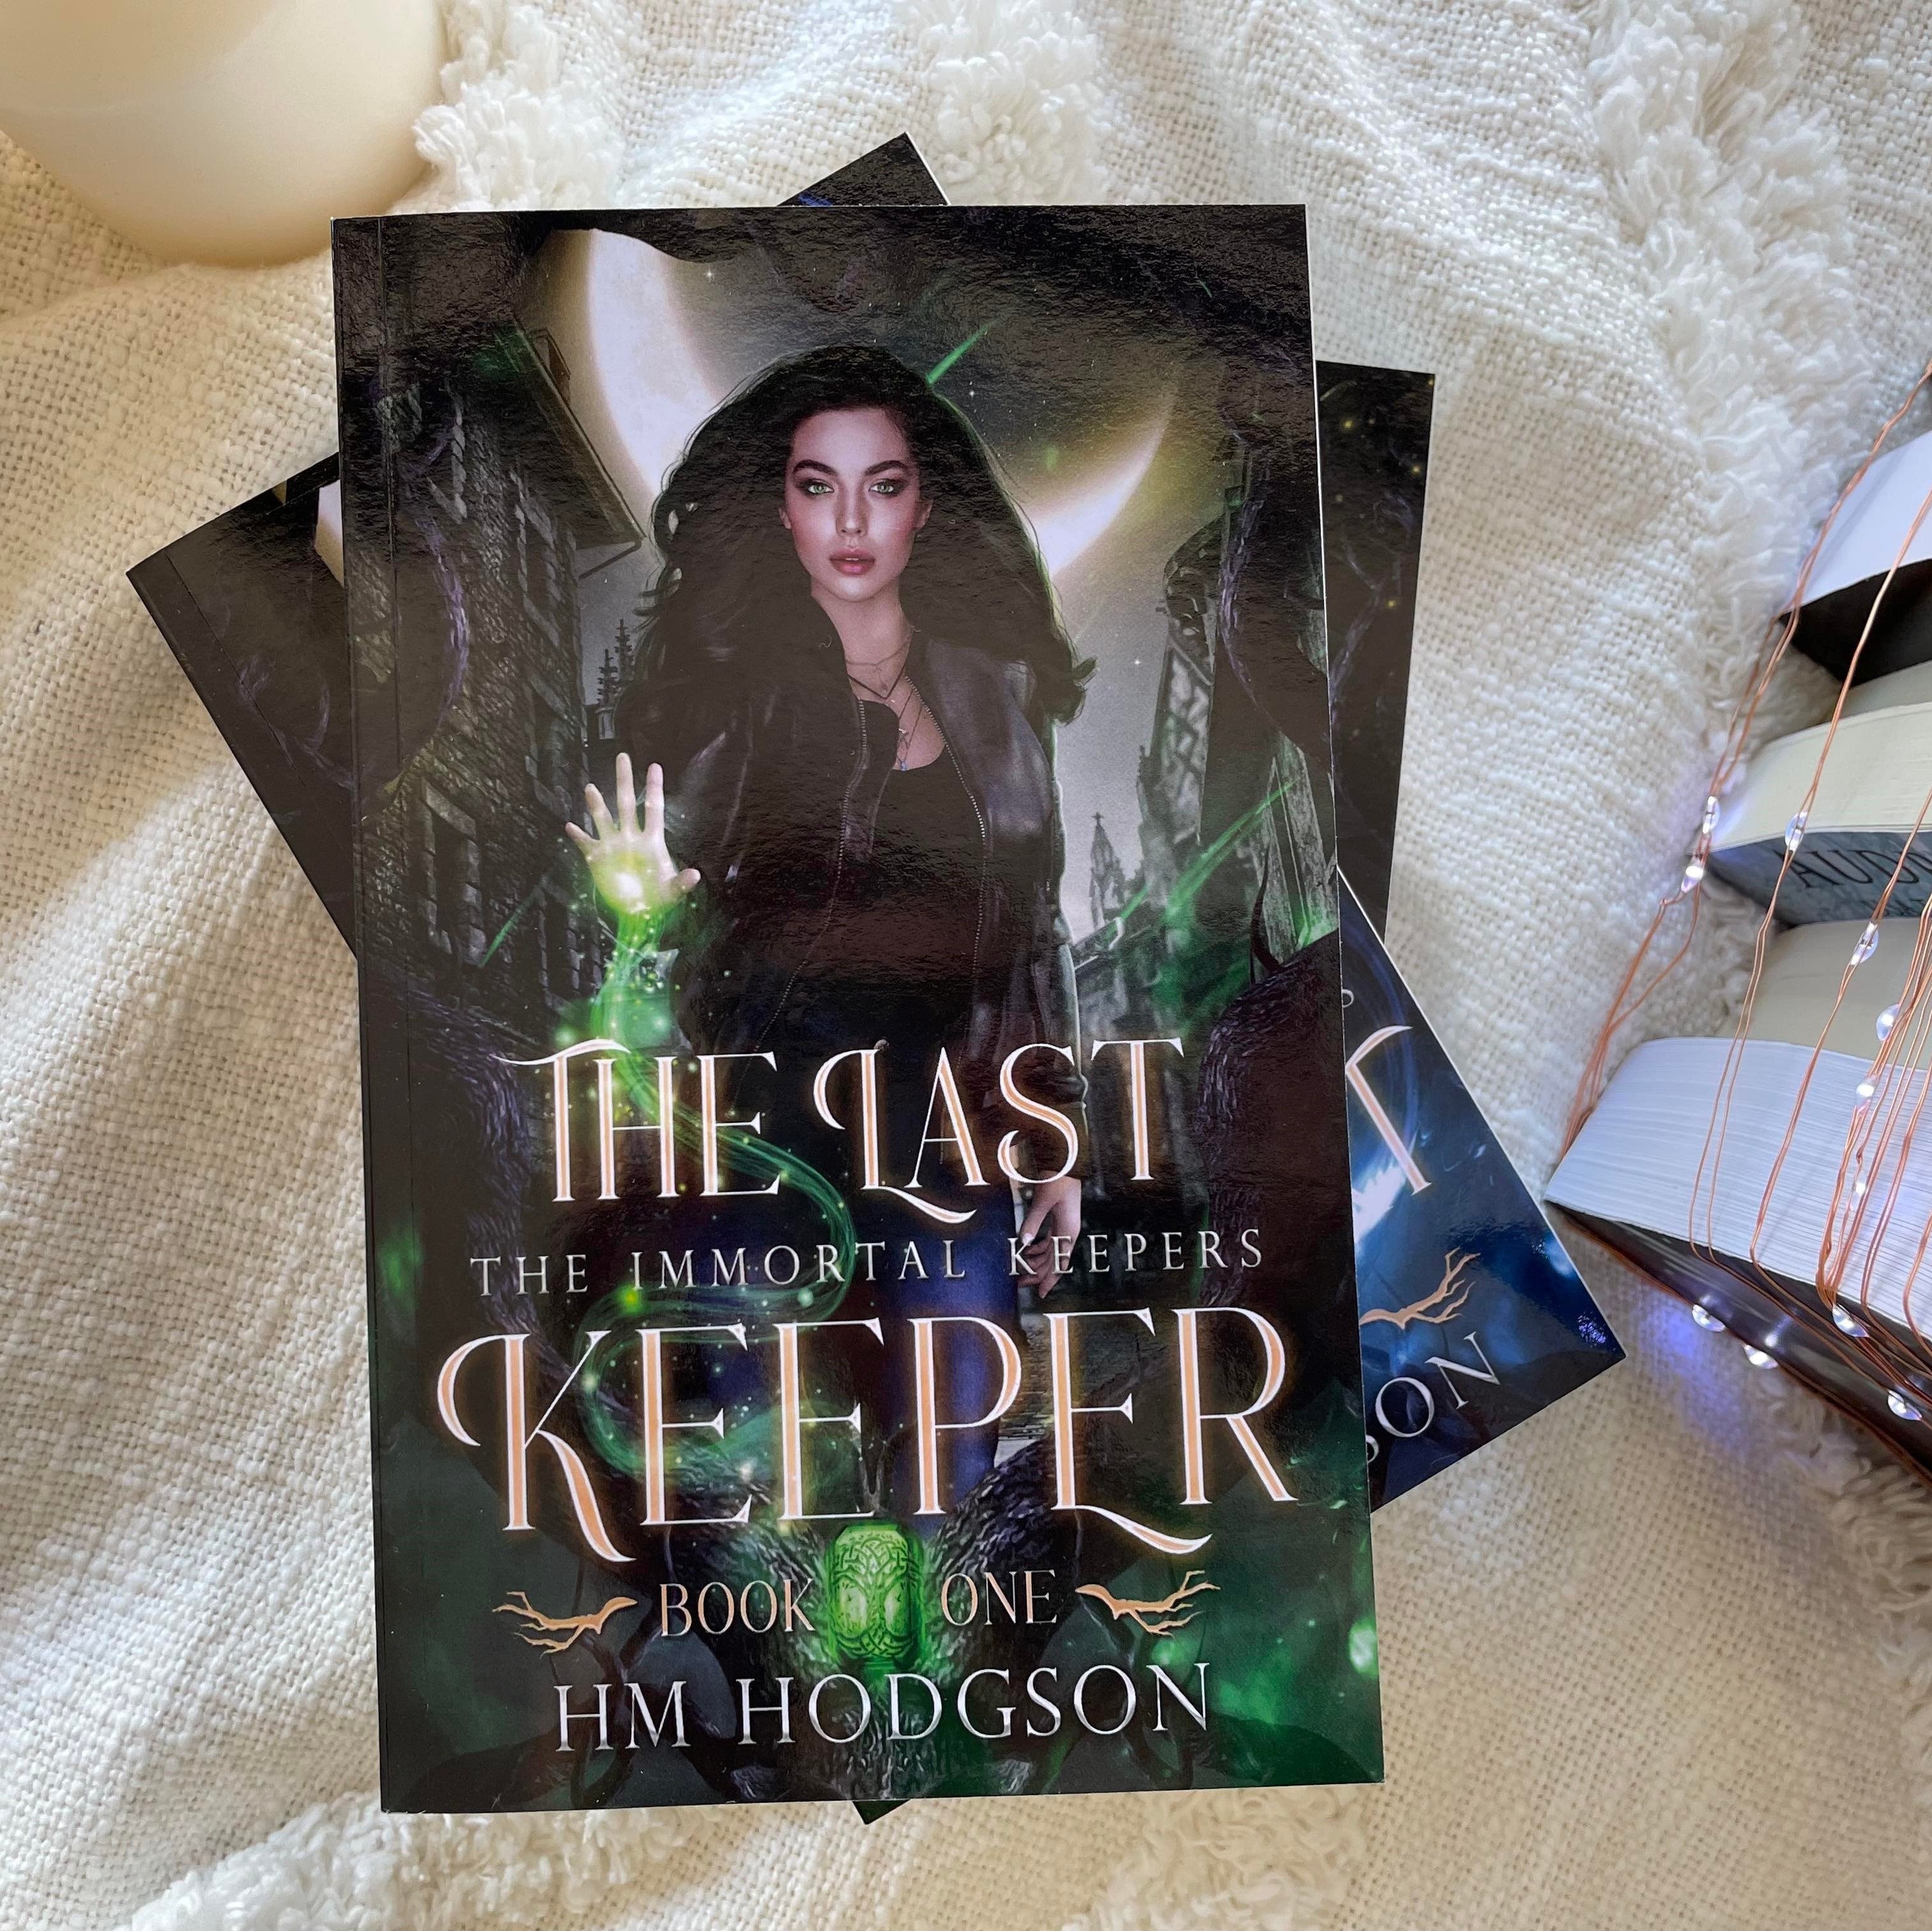 The Immortal Keepers by HM Hodgson